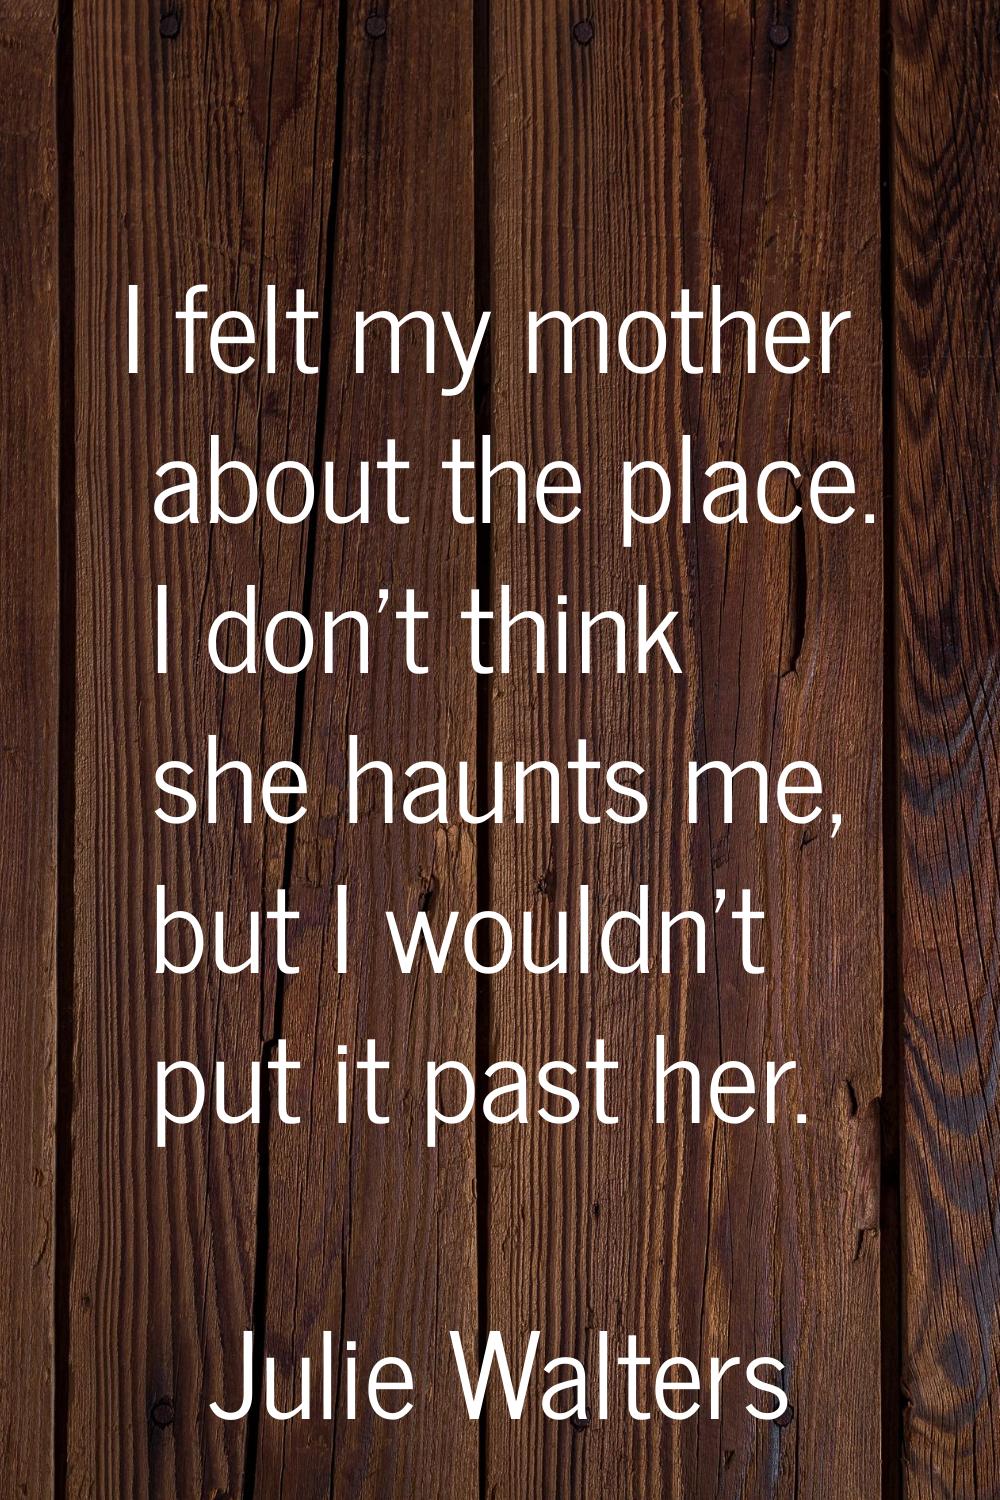 I felt my mother about the place. I don't think she haunts me, but I wouldn't put it past her.